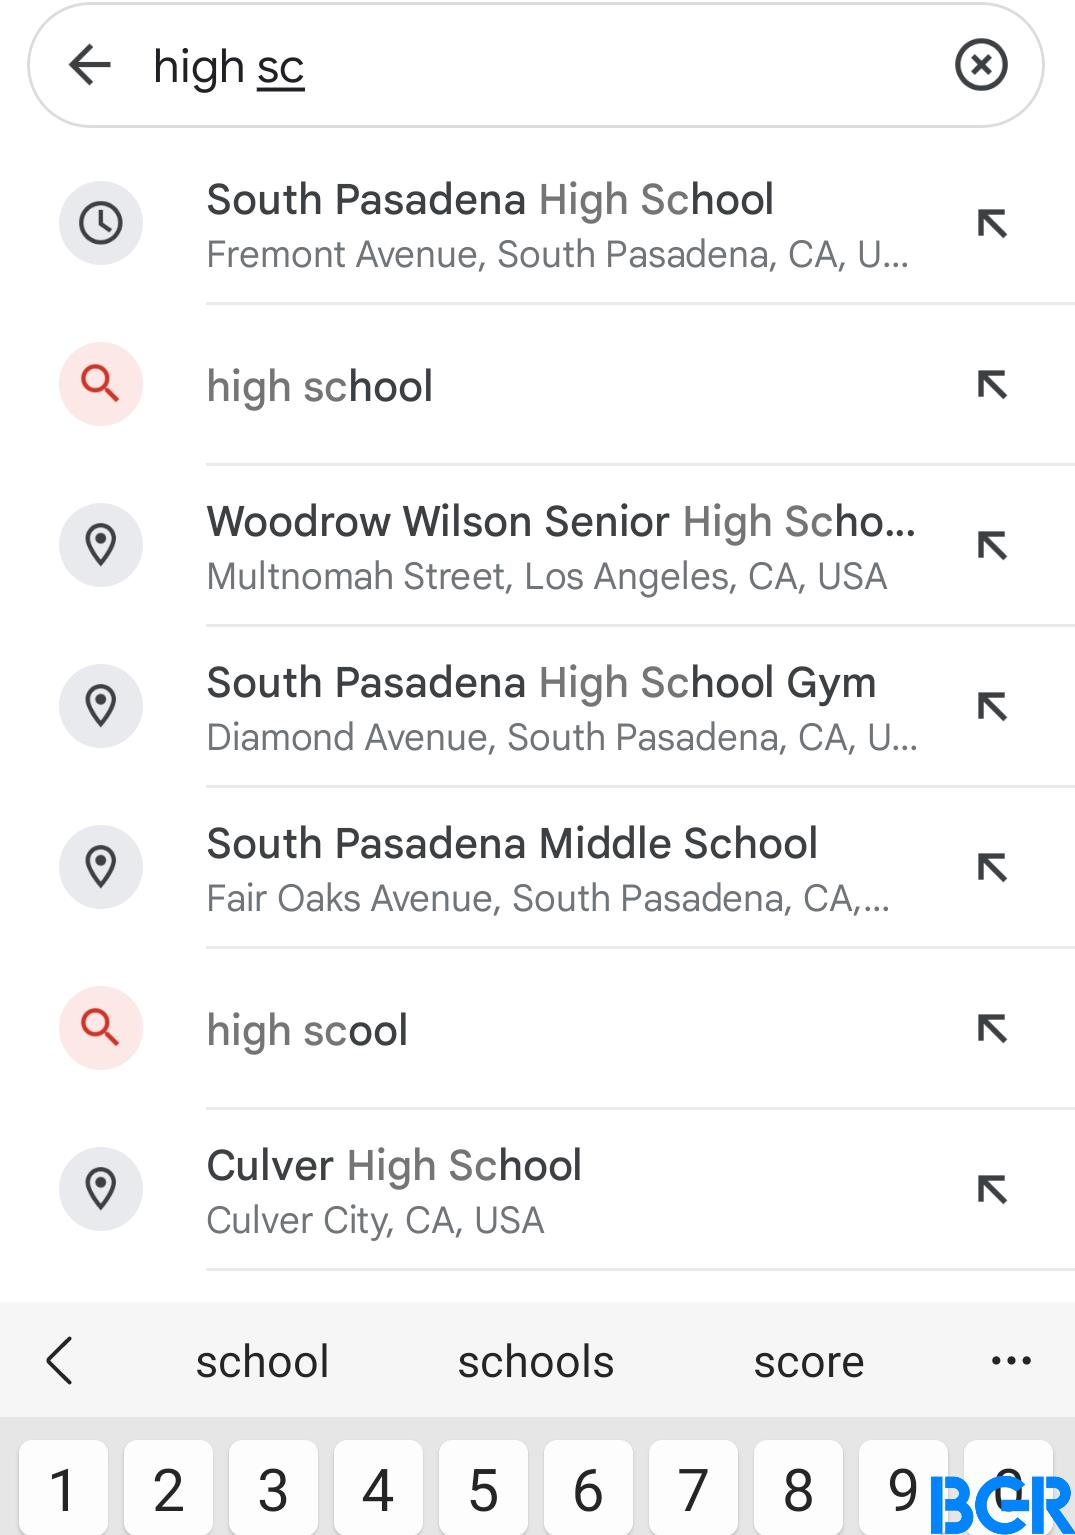 Tap on a search suggestion to drop a pin on Google Map